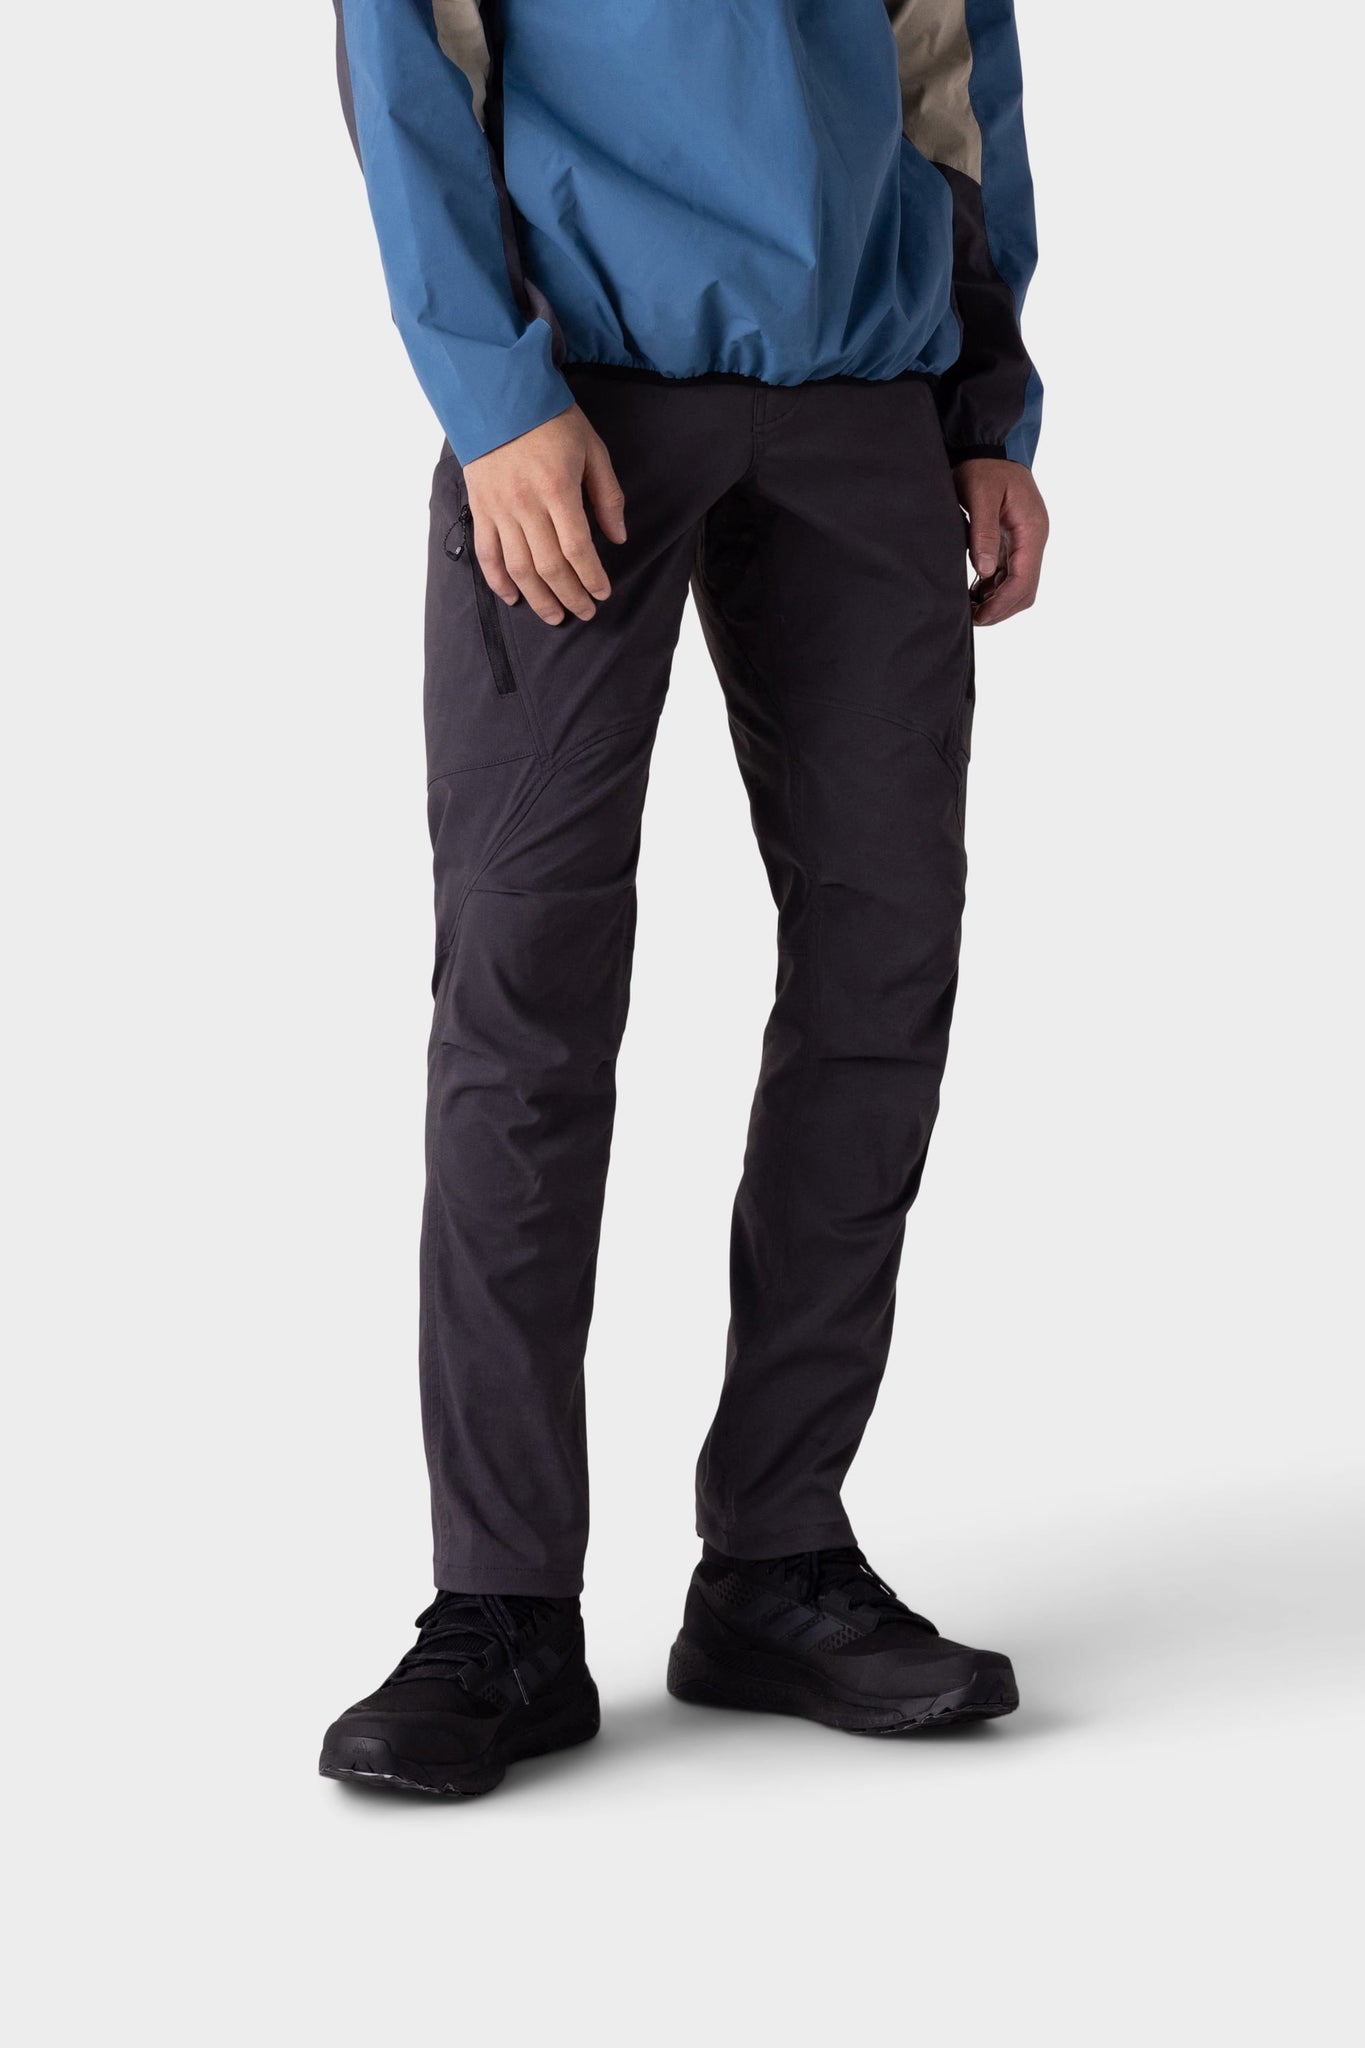 686 - Anything Cargo Pant Slim Fit - all things being eco chilliwack canada - men's outdoor and athletic apparel